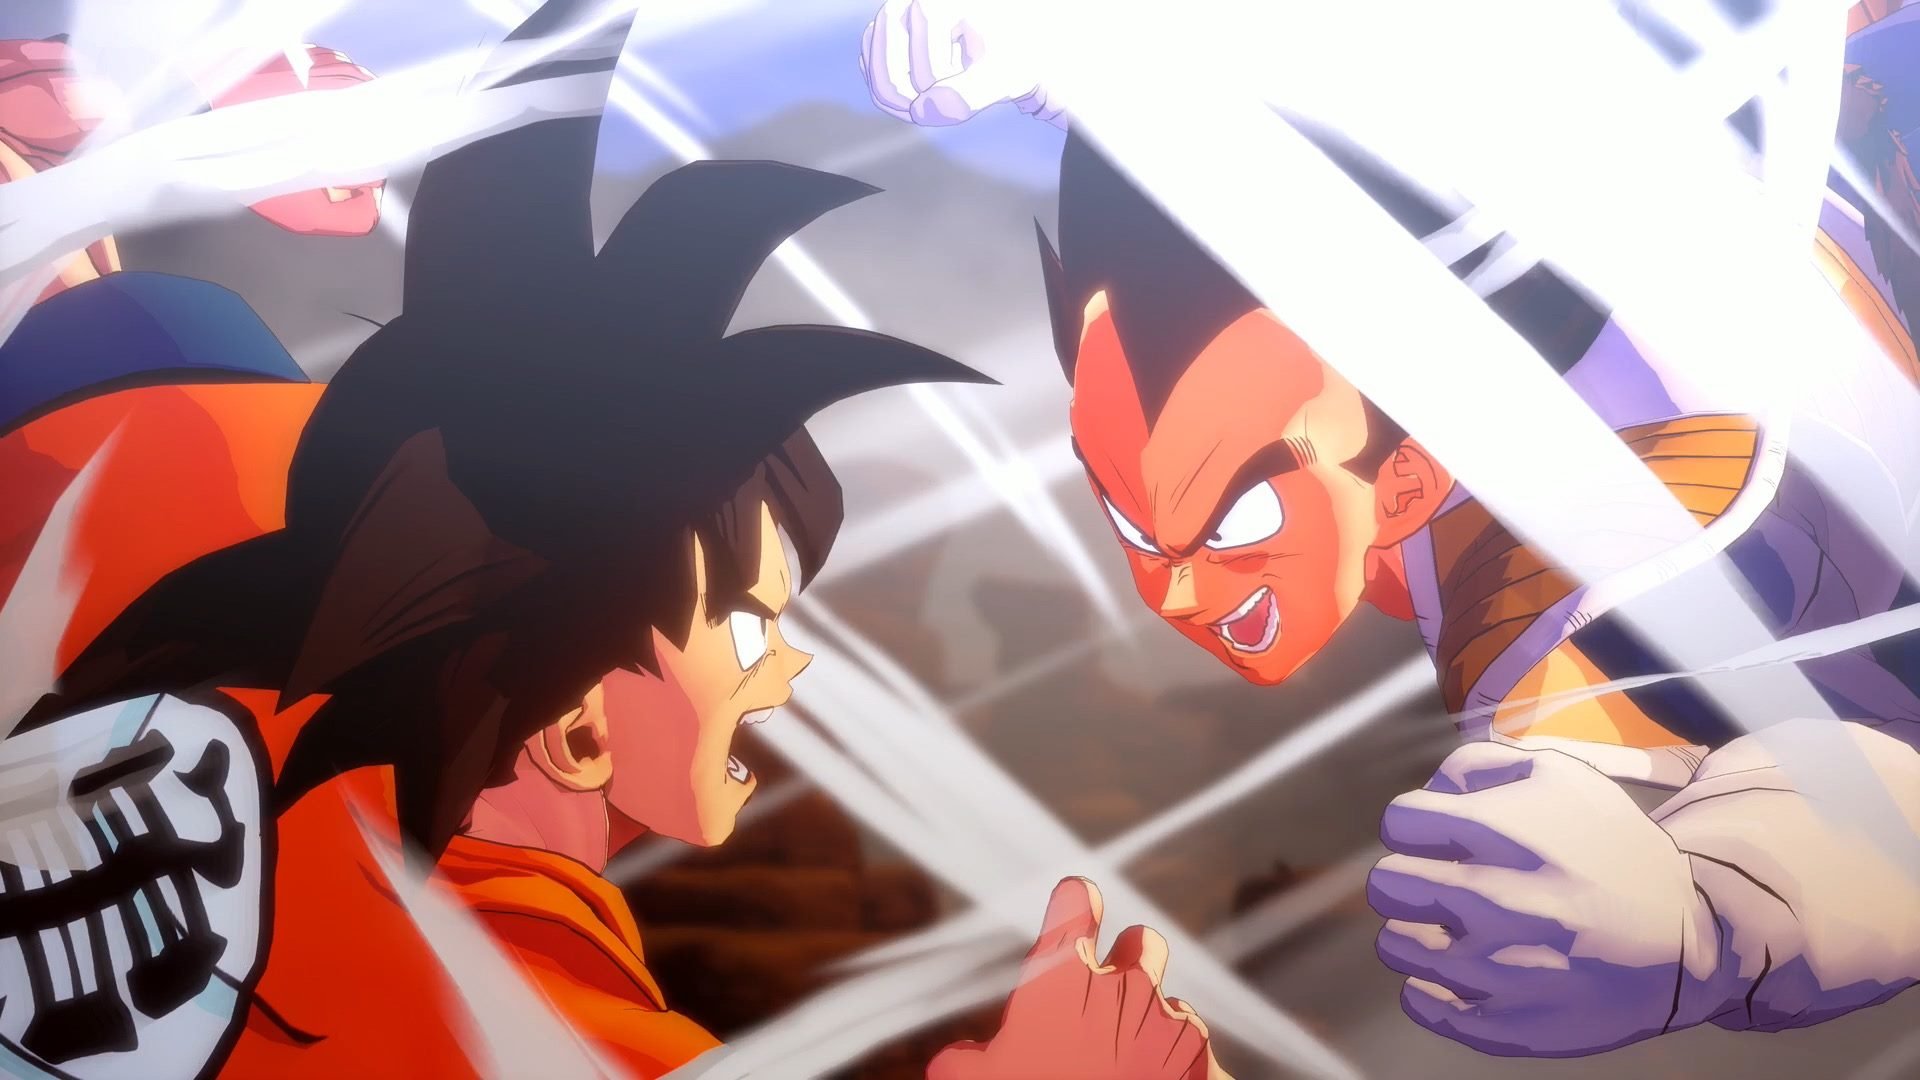 Dragon Ball Z Kakarot Massive Day One Update File Size and Patch Notes